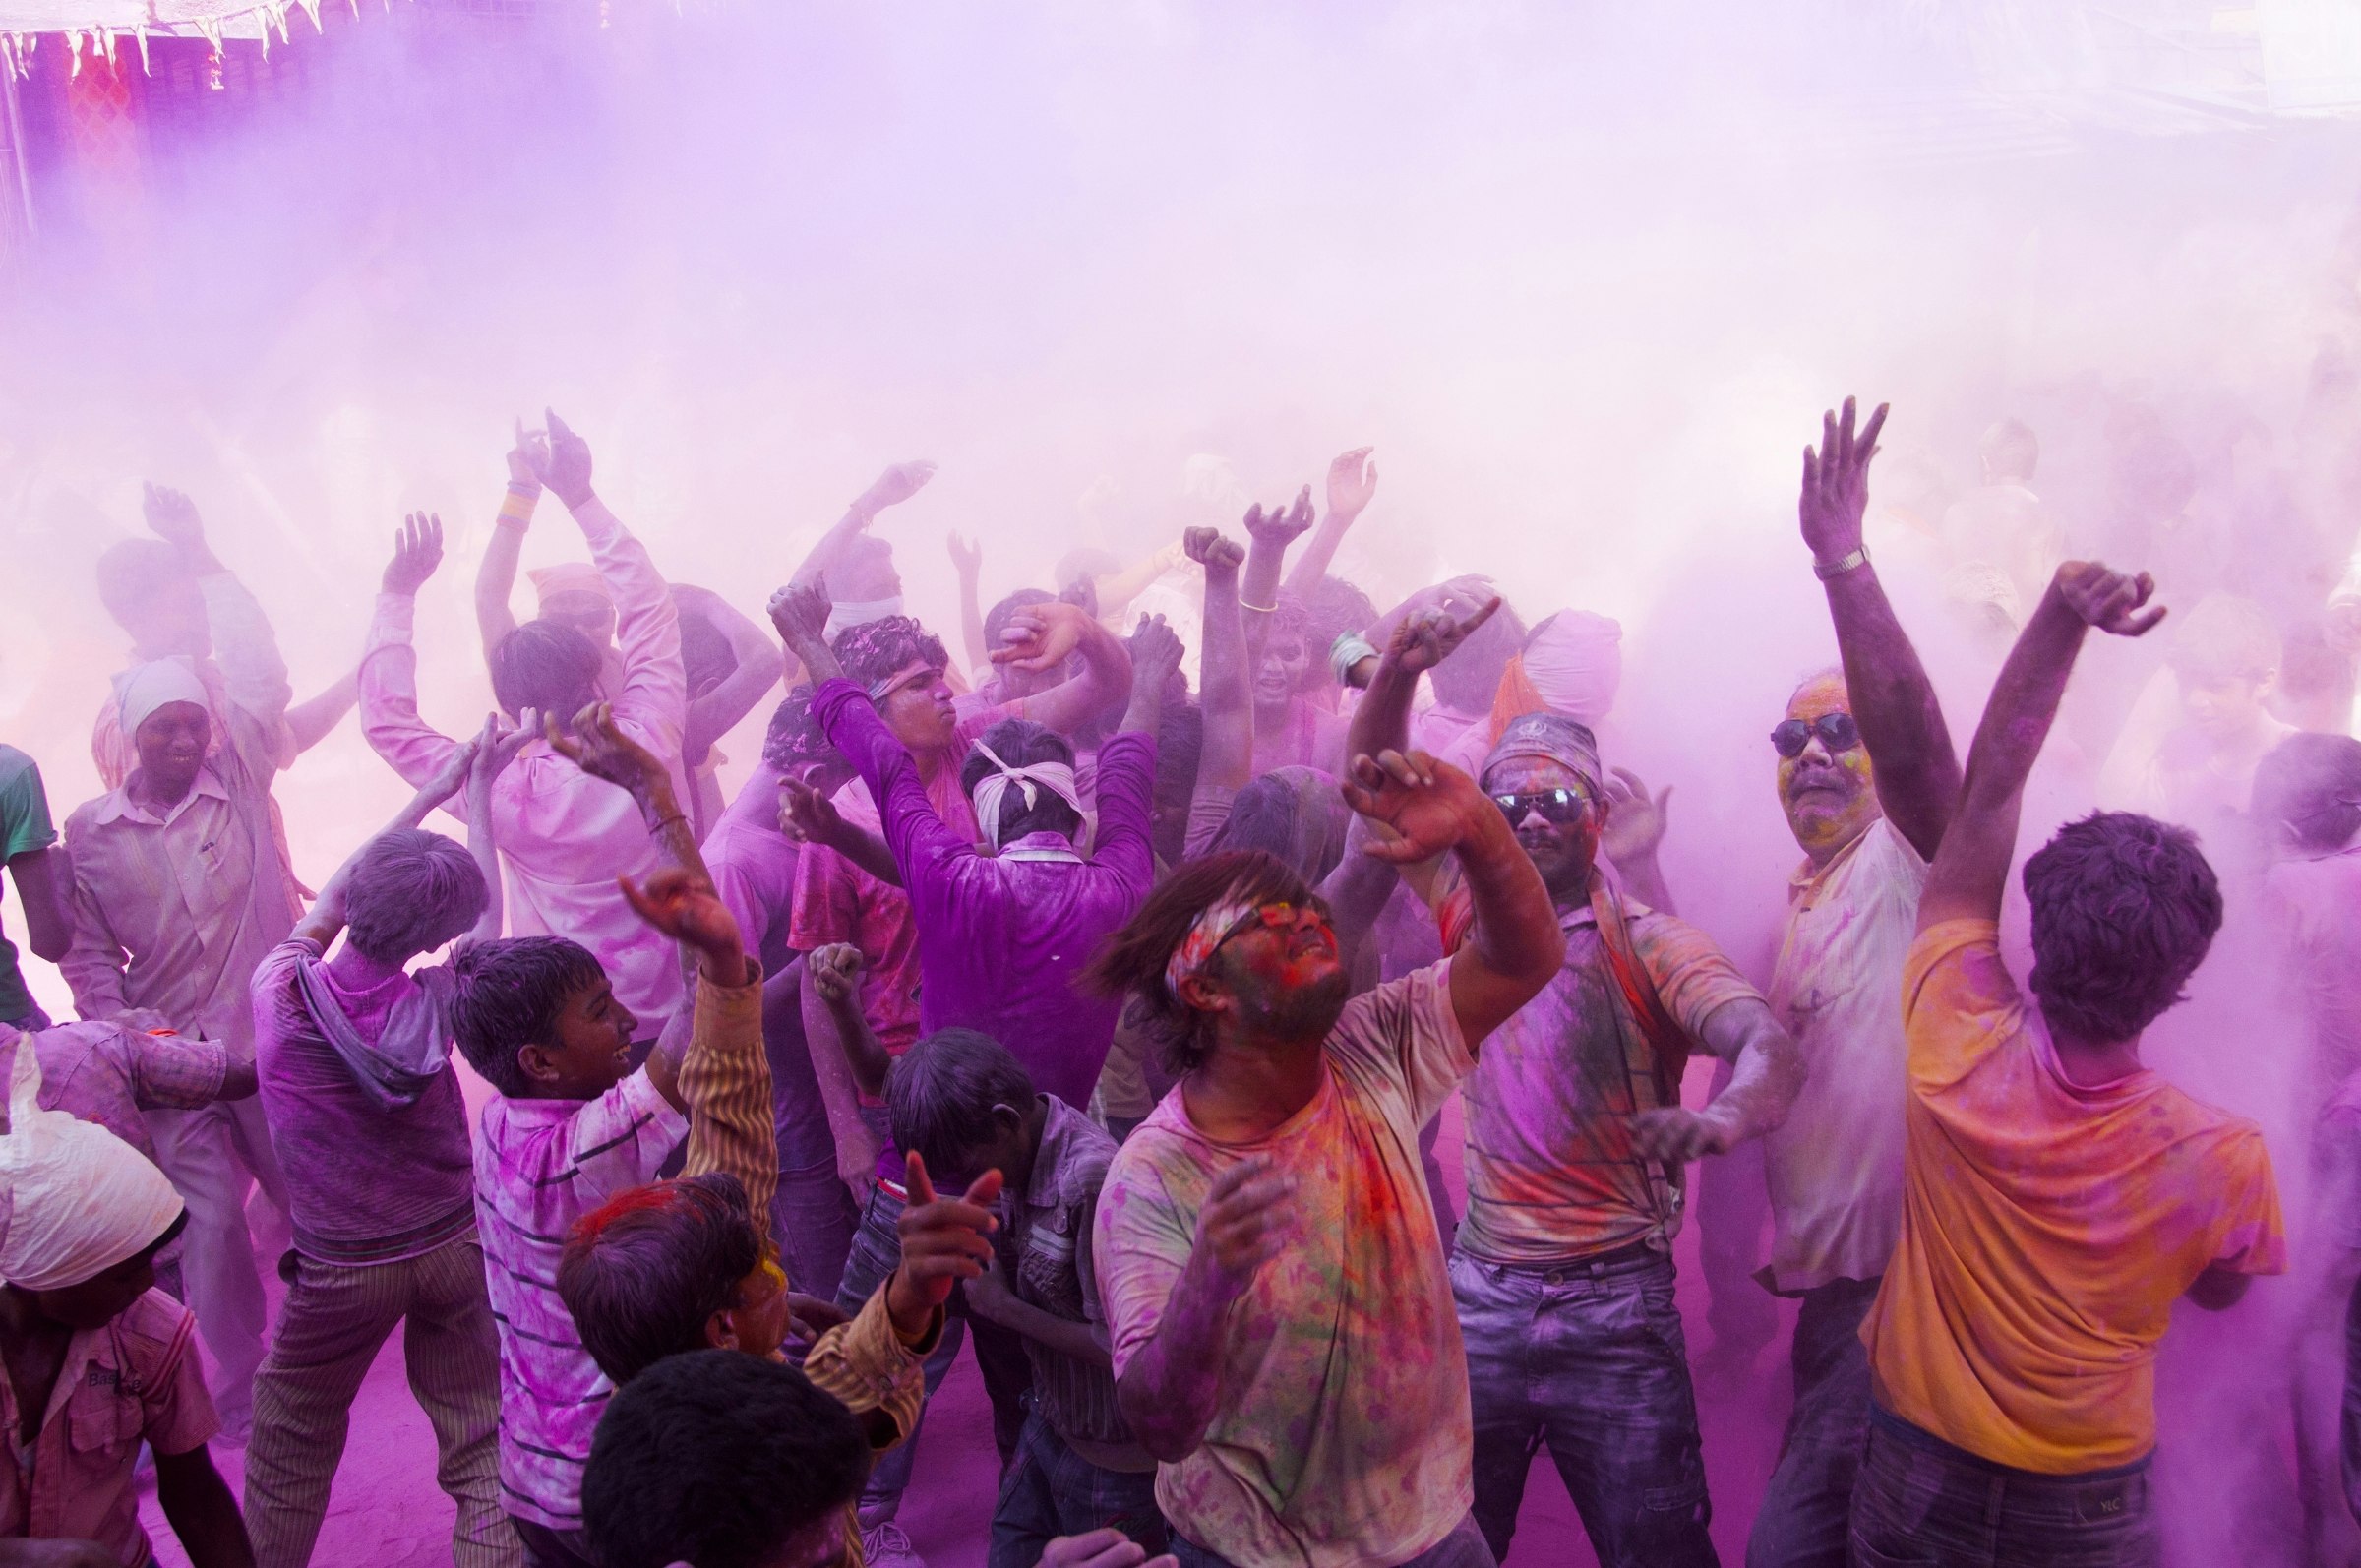  Crowd of men dancing while covered in purple powede